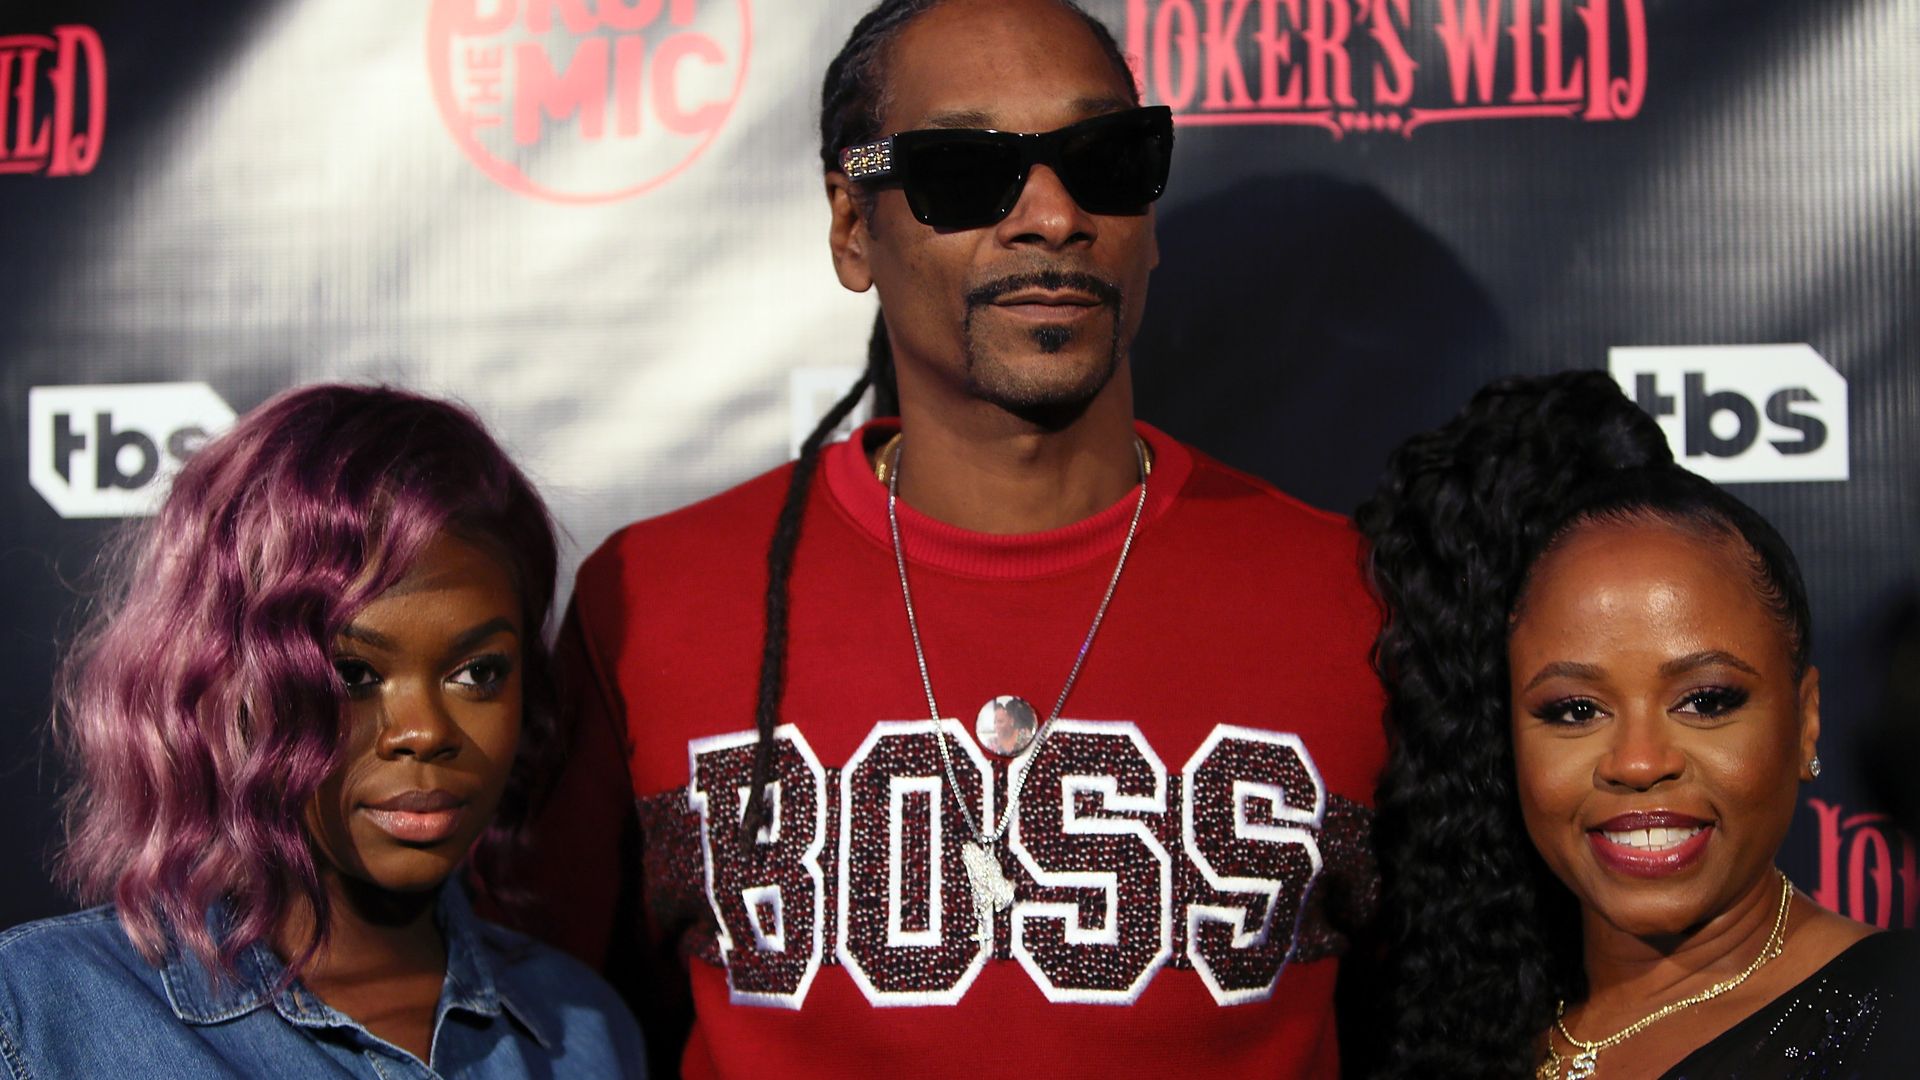 Cori Broadus, with father rapper Snoop Dogg, and mother Shante Broadus